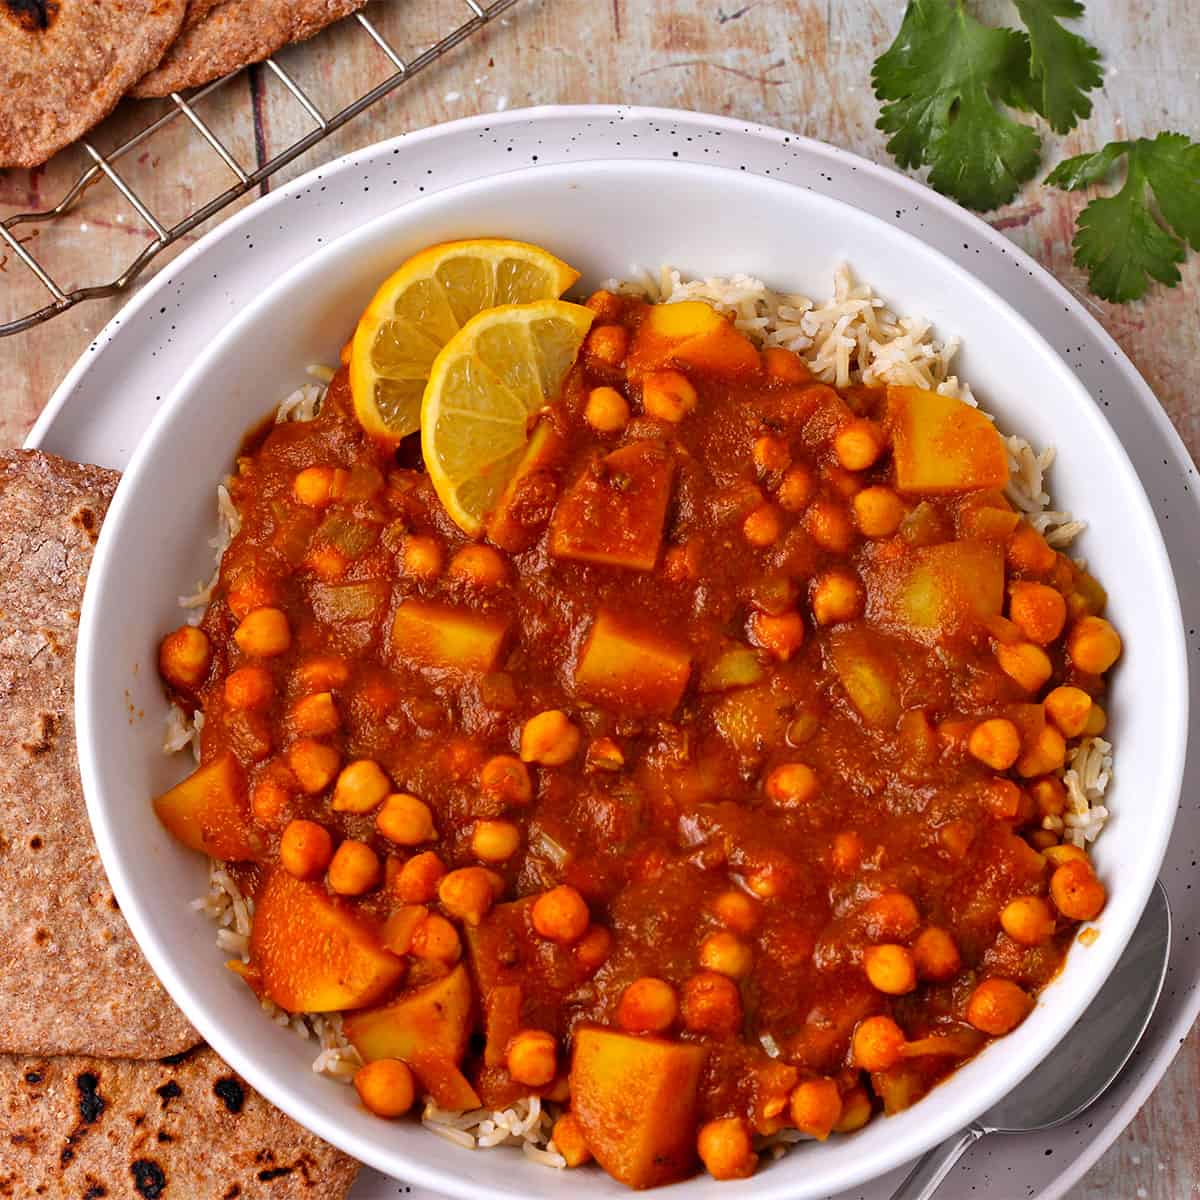 Overhead view of potato and chickpea curry in white bowl with brown rice.